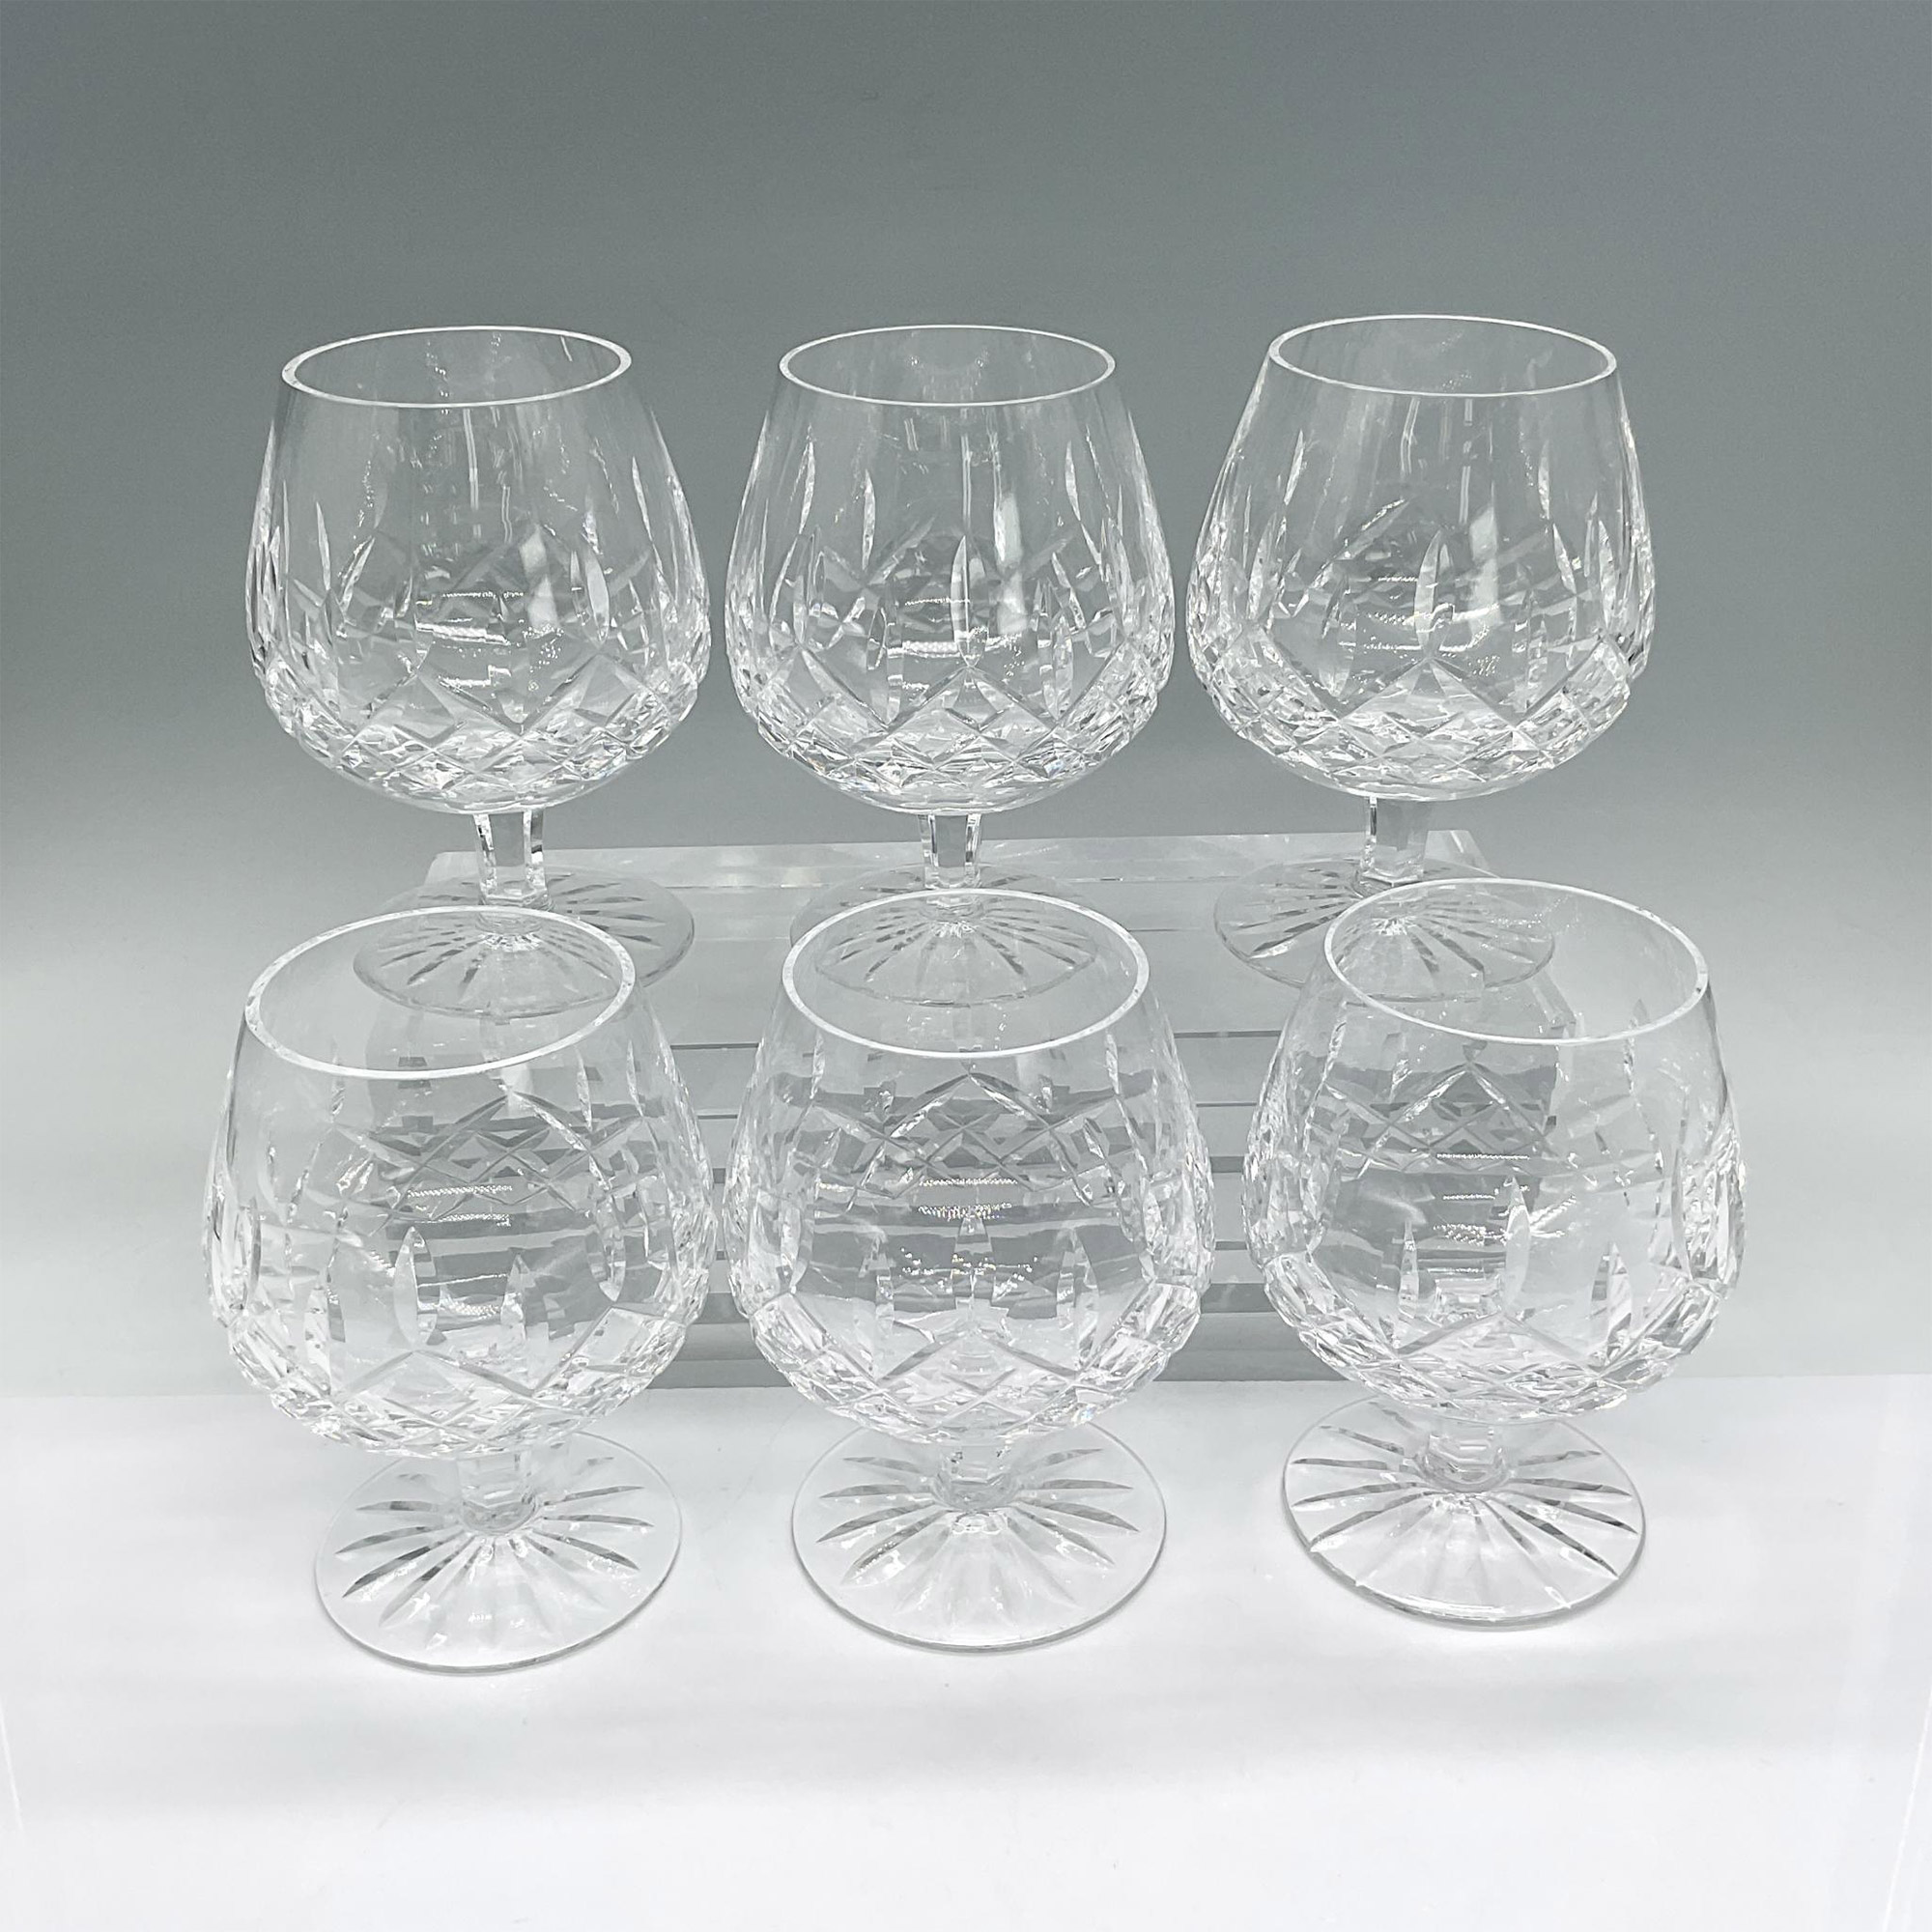 6pc Waterford Crystal Brandy Glasses, Lismore - Image 2 of 3